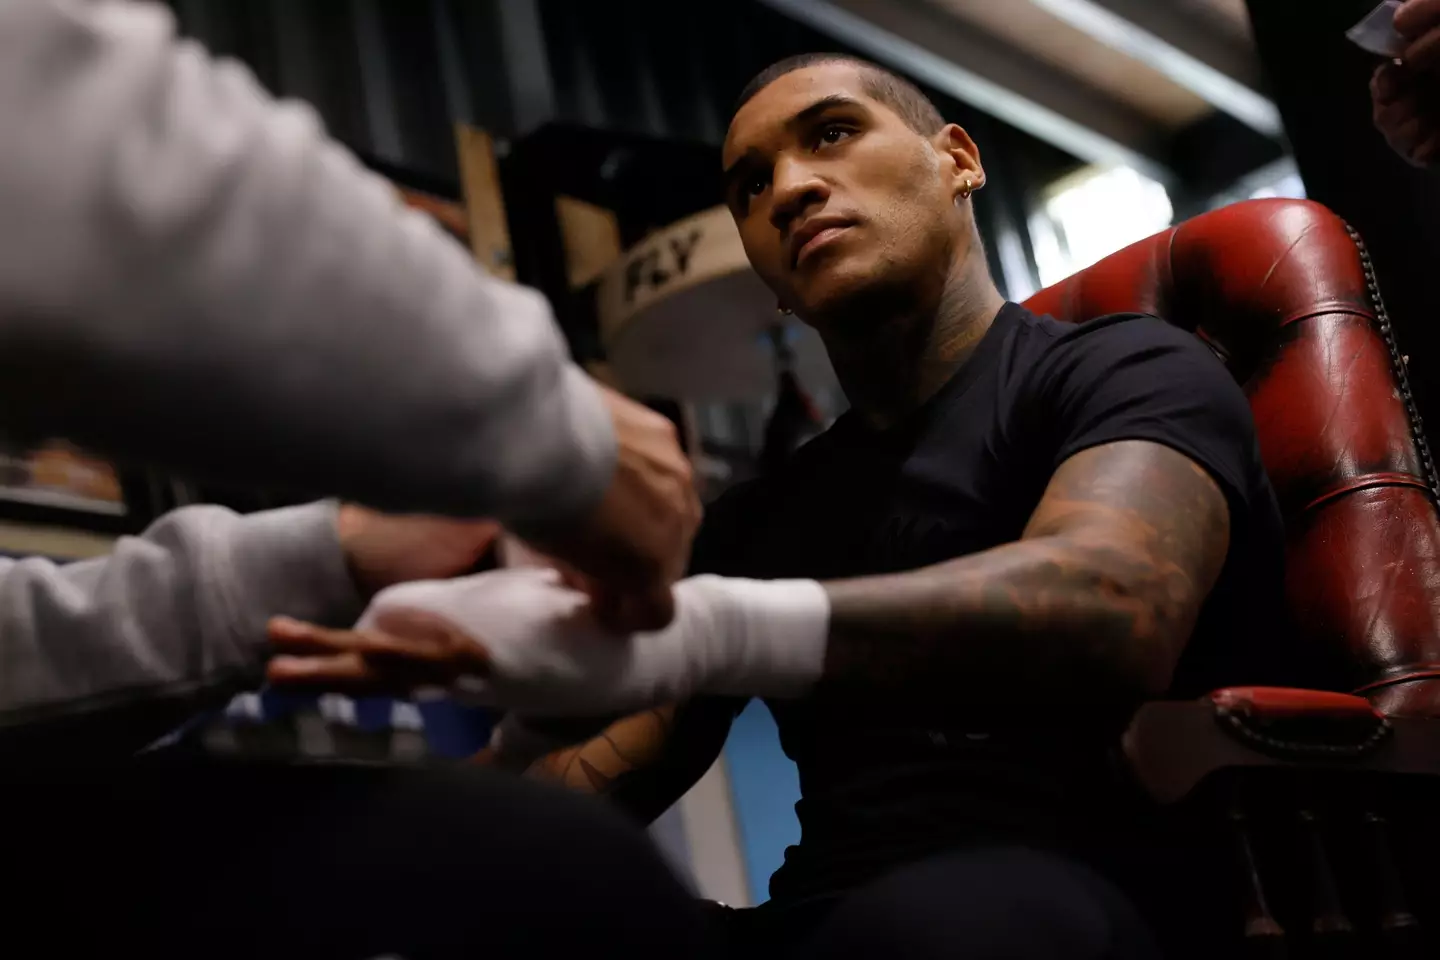 Conor Benn tested positive for a banned substance ahead of his fight with Chris Eubank Jr (Image: Alamy)